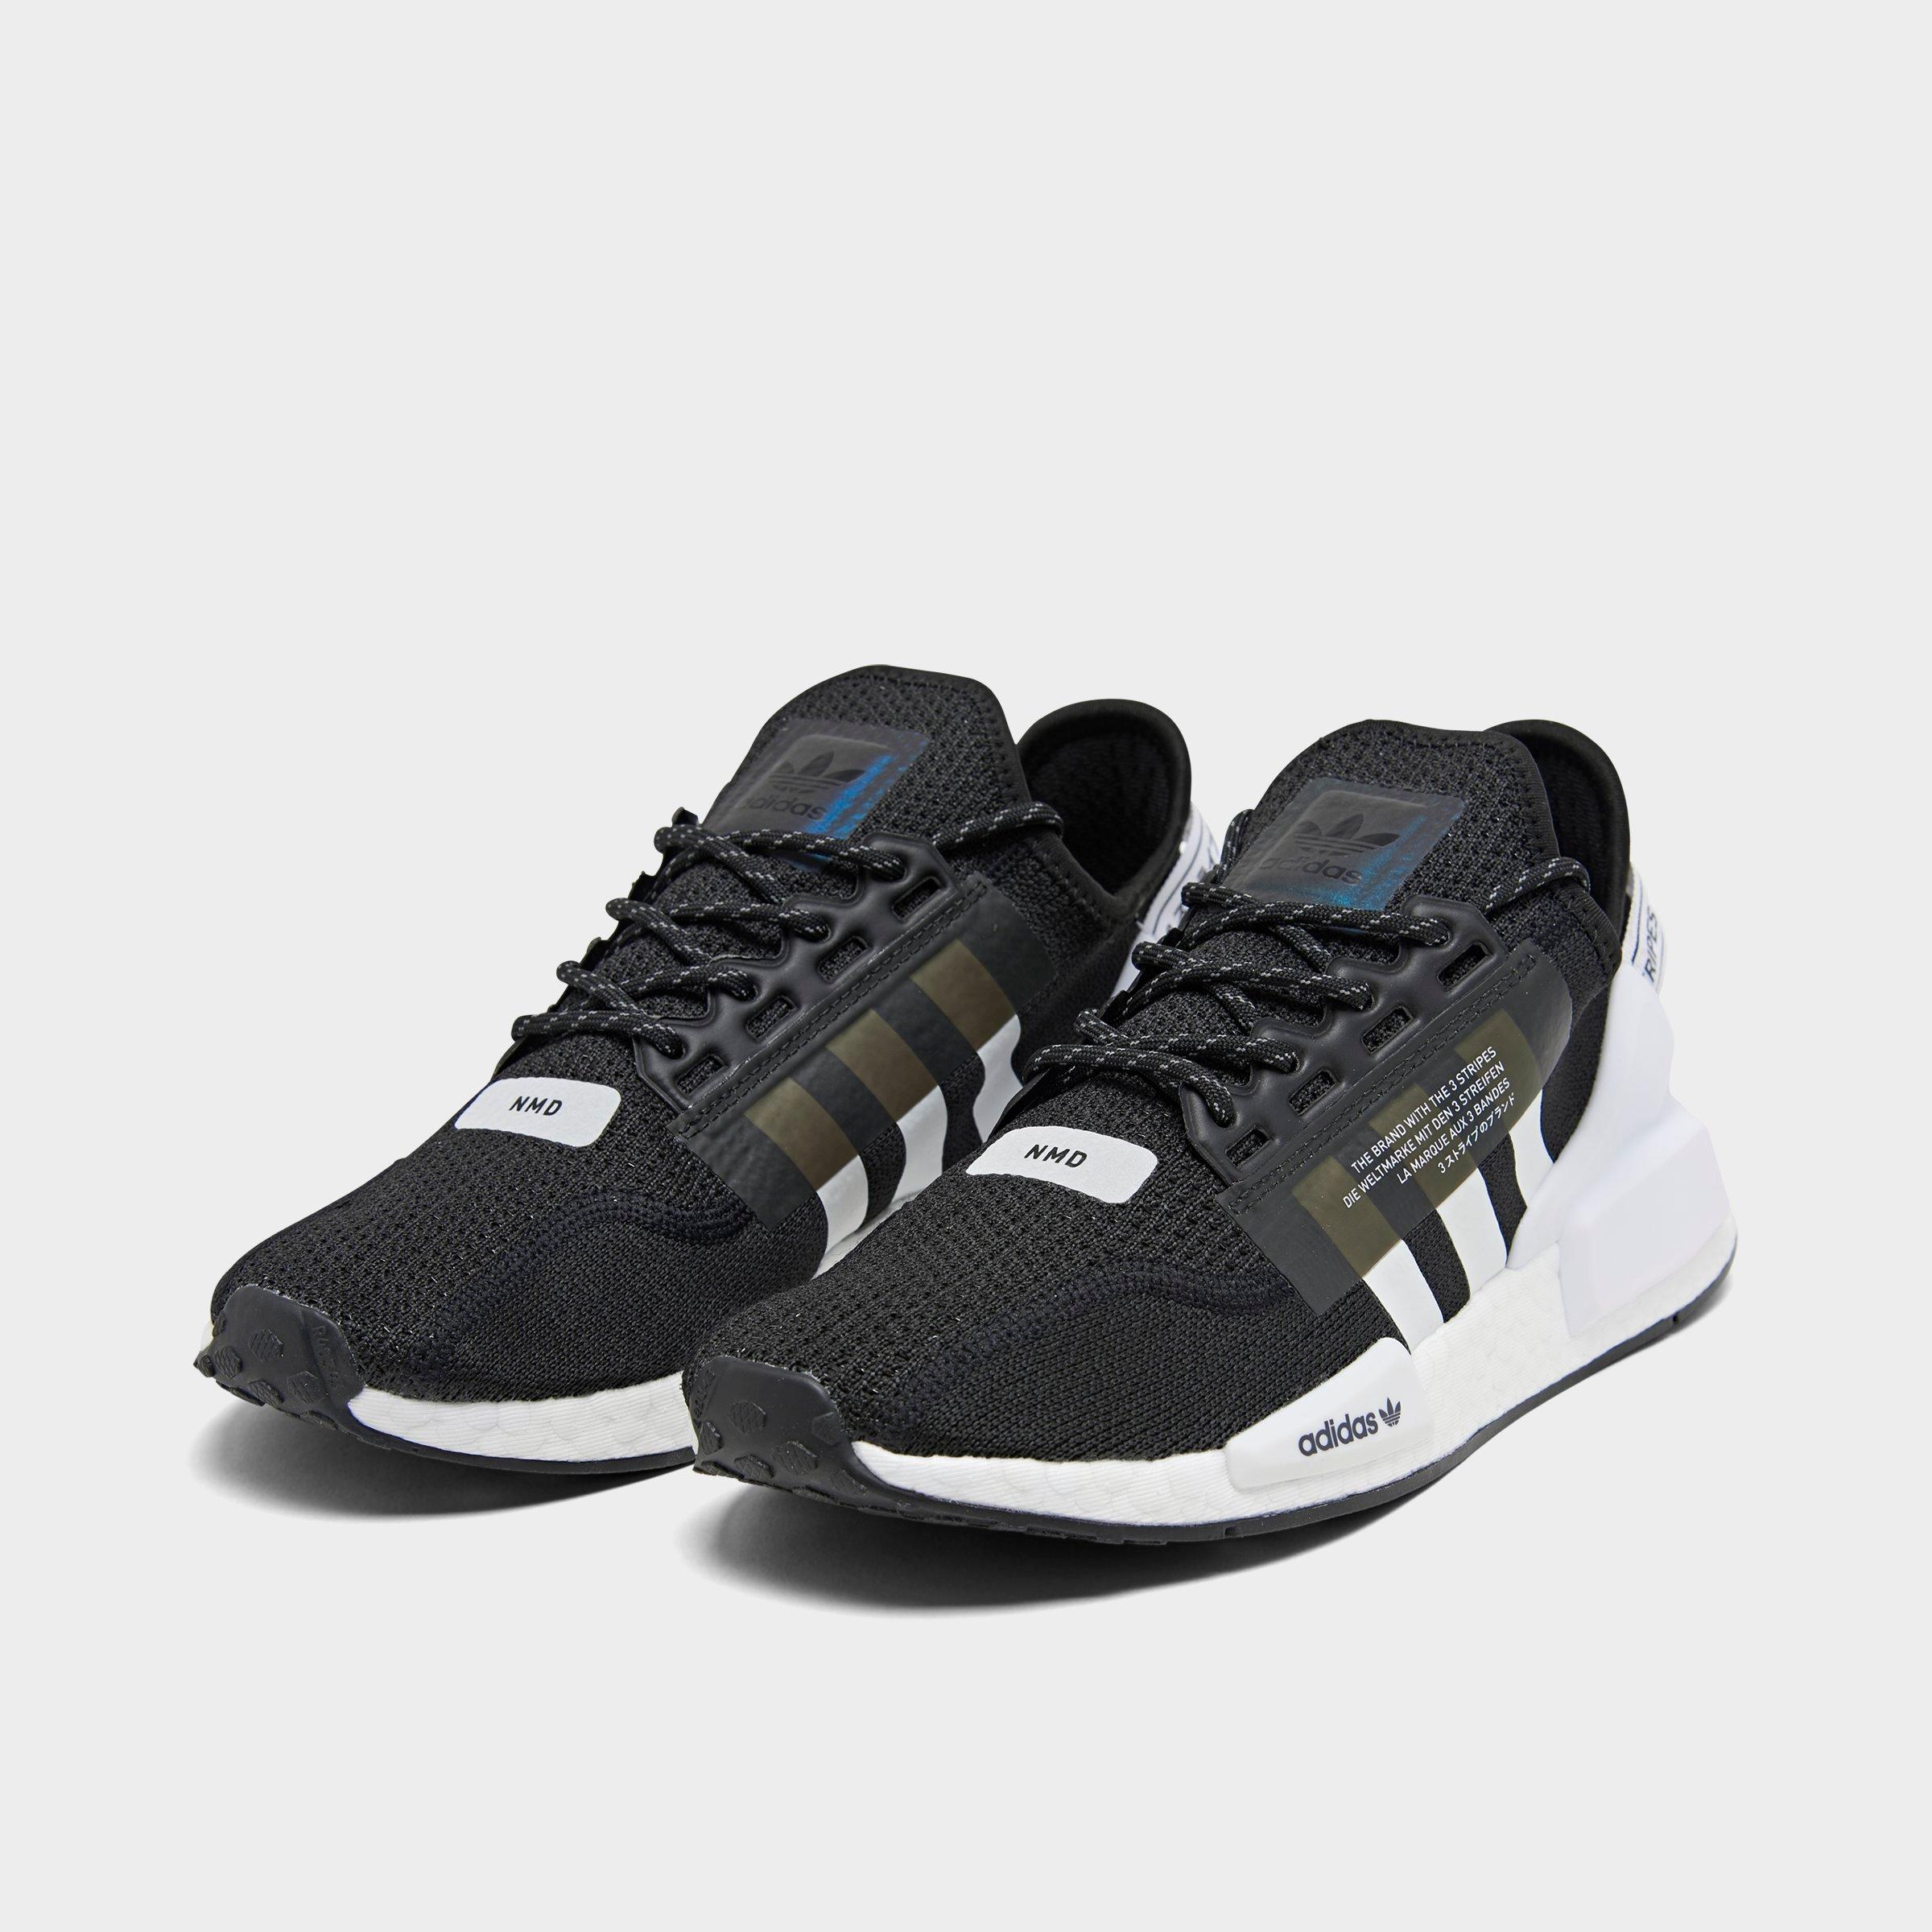 Nmd r1 v2 shoes adidas source by downloads adidas Pinterest